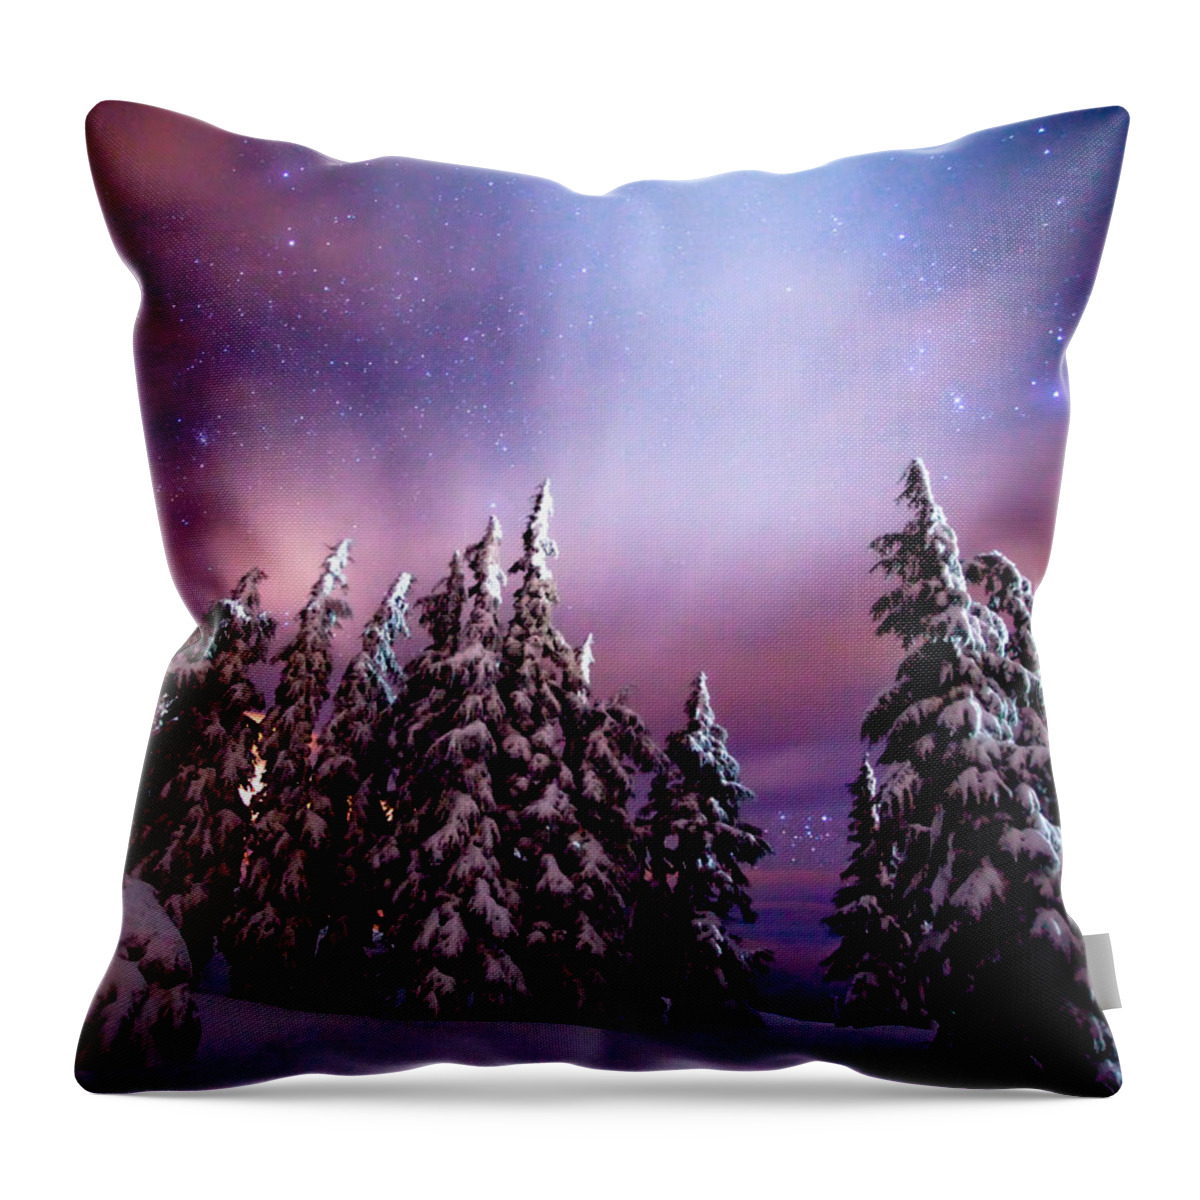  River Throw Pillow featuring the photograph Winter Nights by Darren White